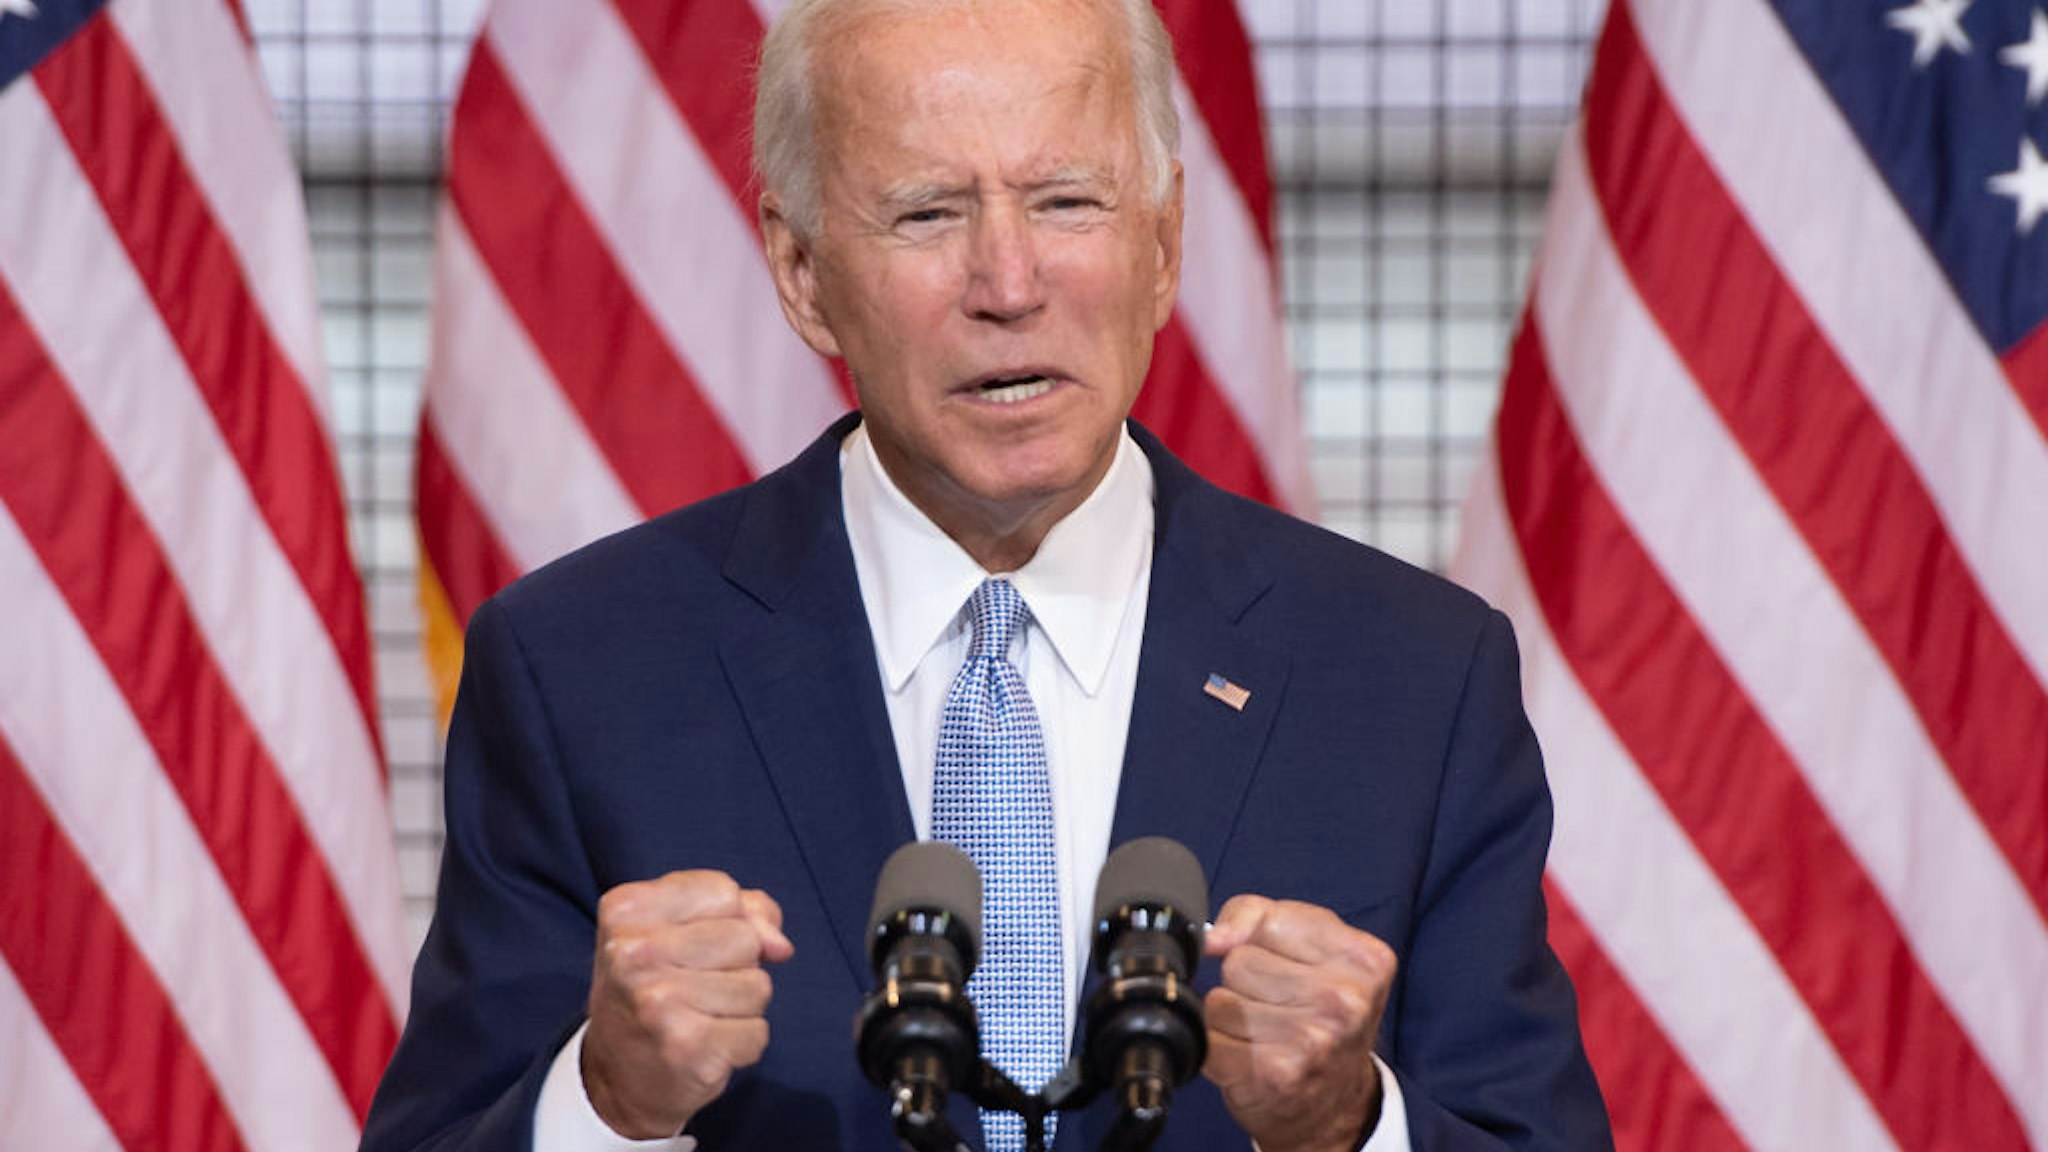 Democratic presidential nominee former US Vice President Joe Biden speaks during a campaign event at Mill 19 in Pittsburgh, Pennsylvania, August 31, 2020.